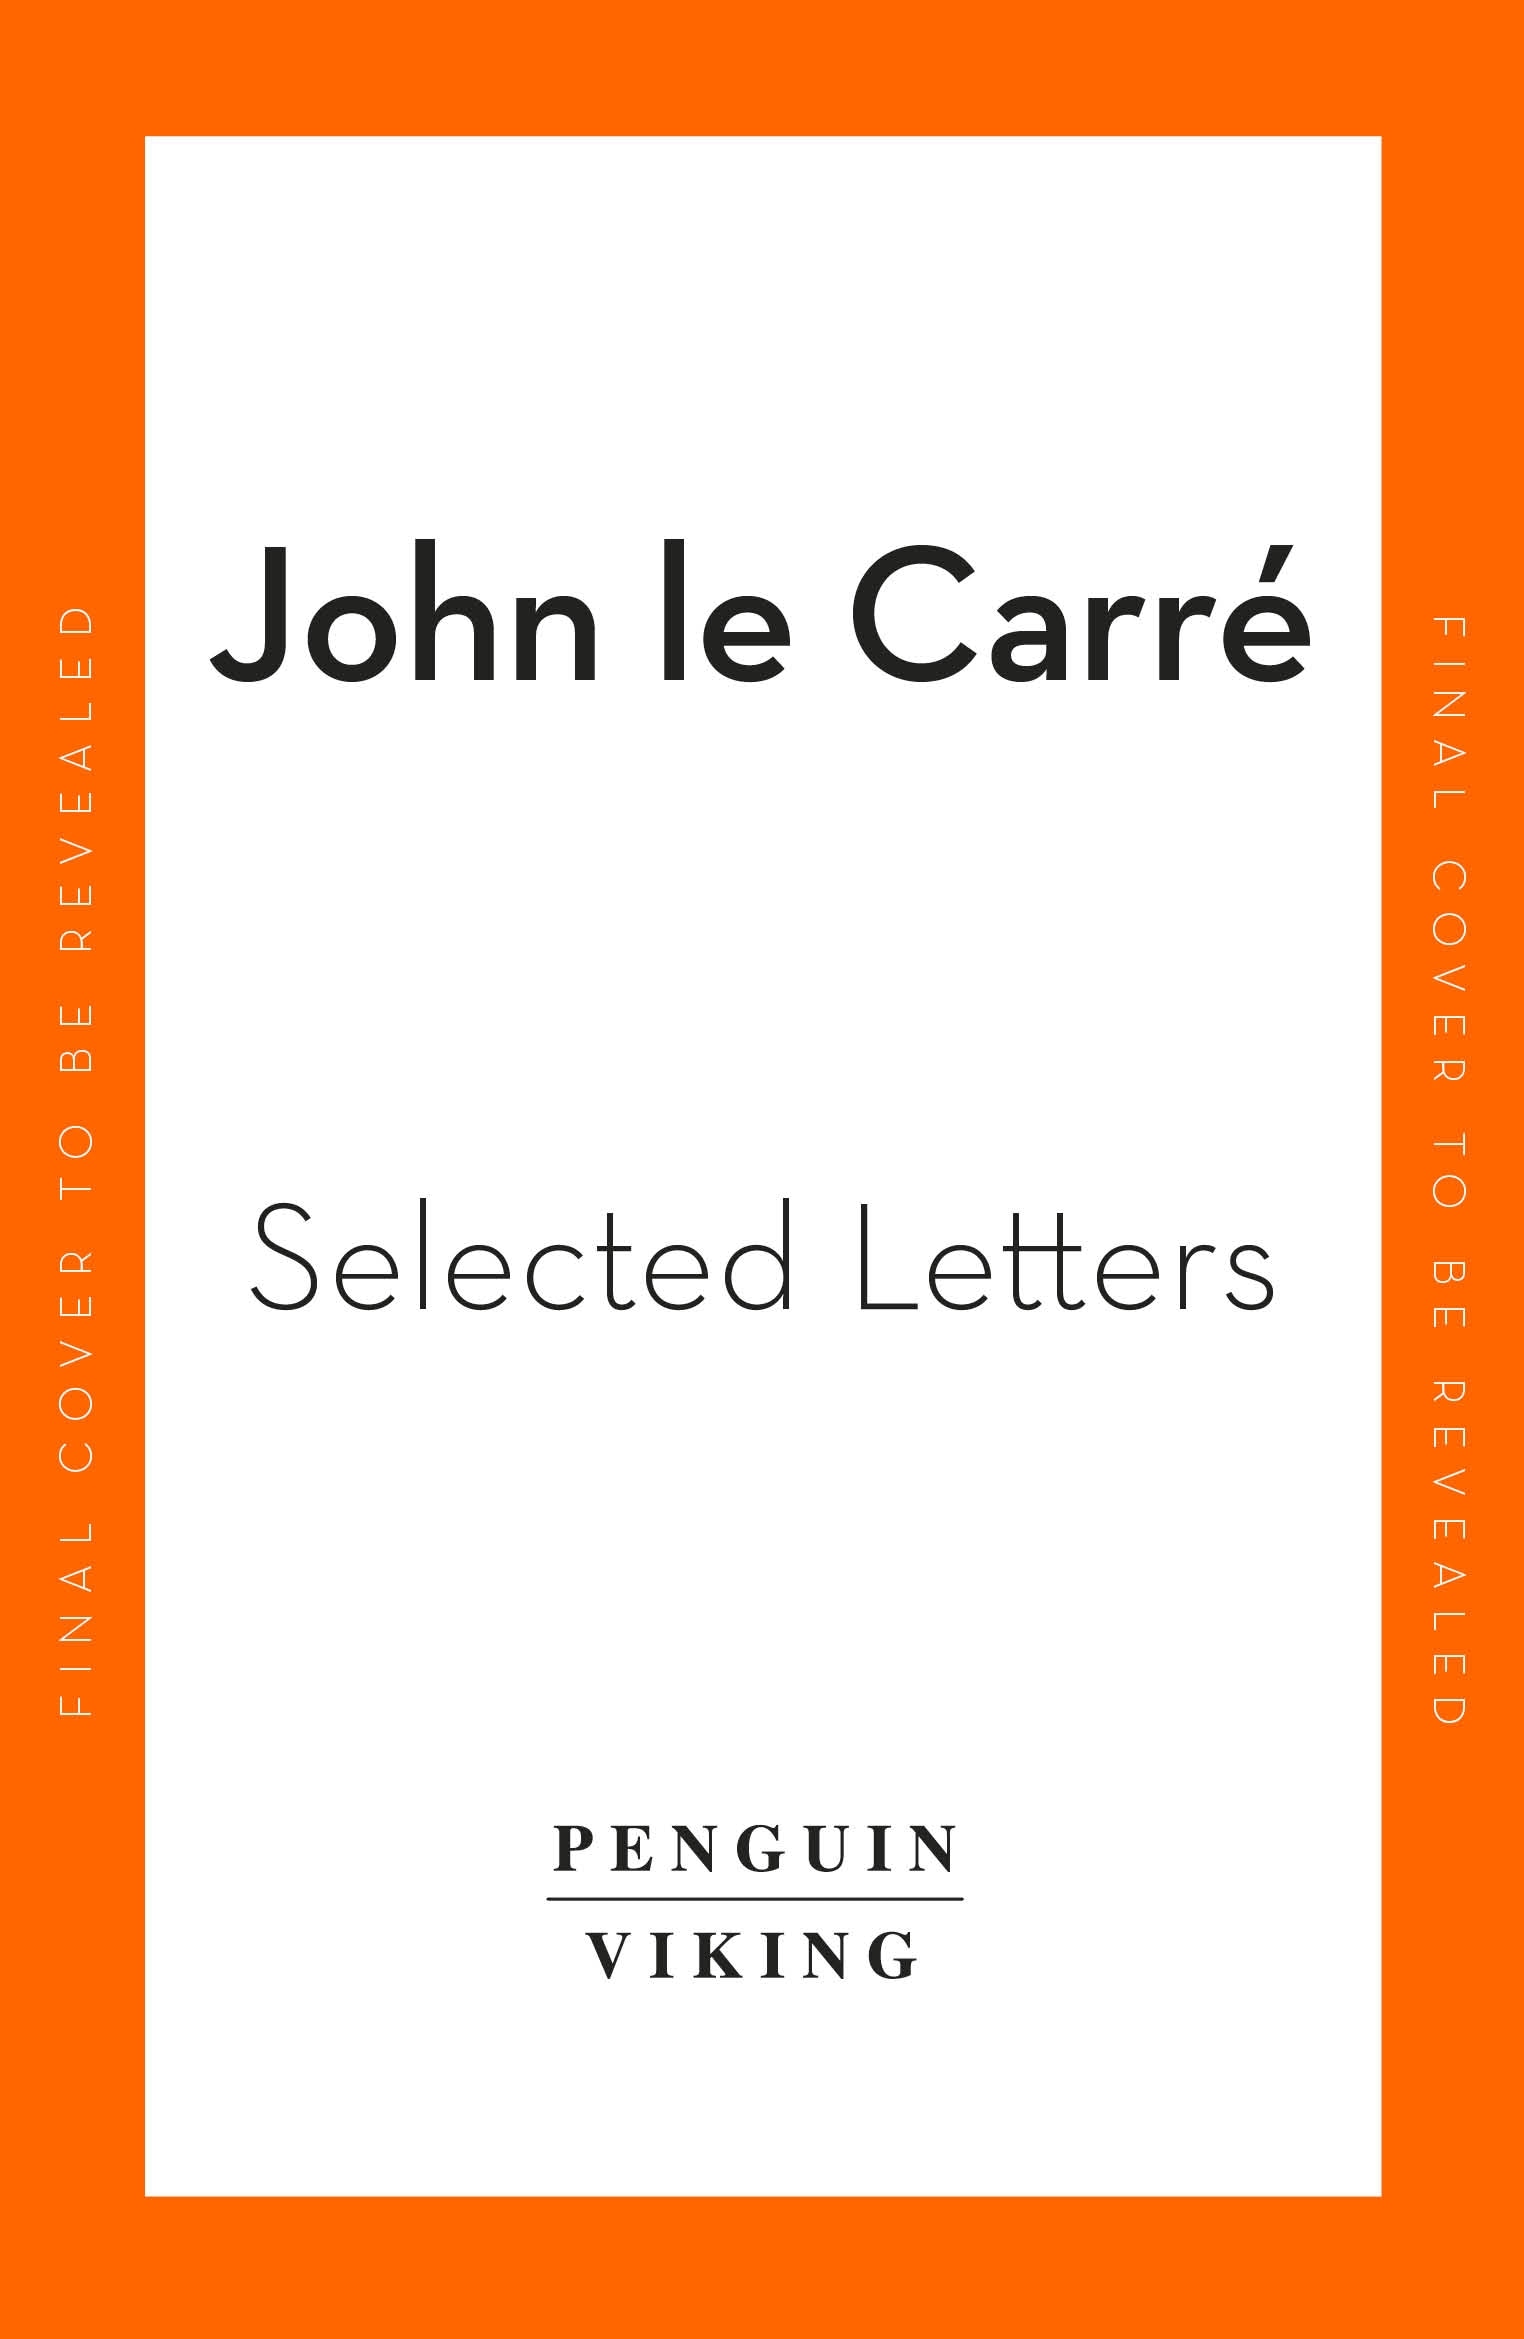 Book “Selected Letters” by John le Carré — November 3, 2022